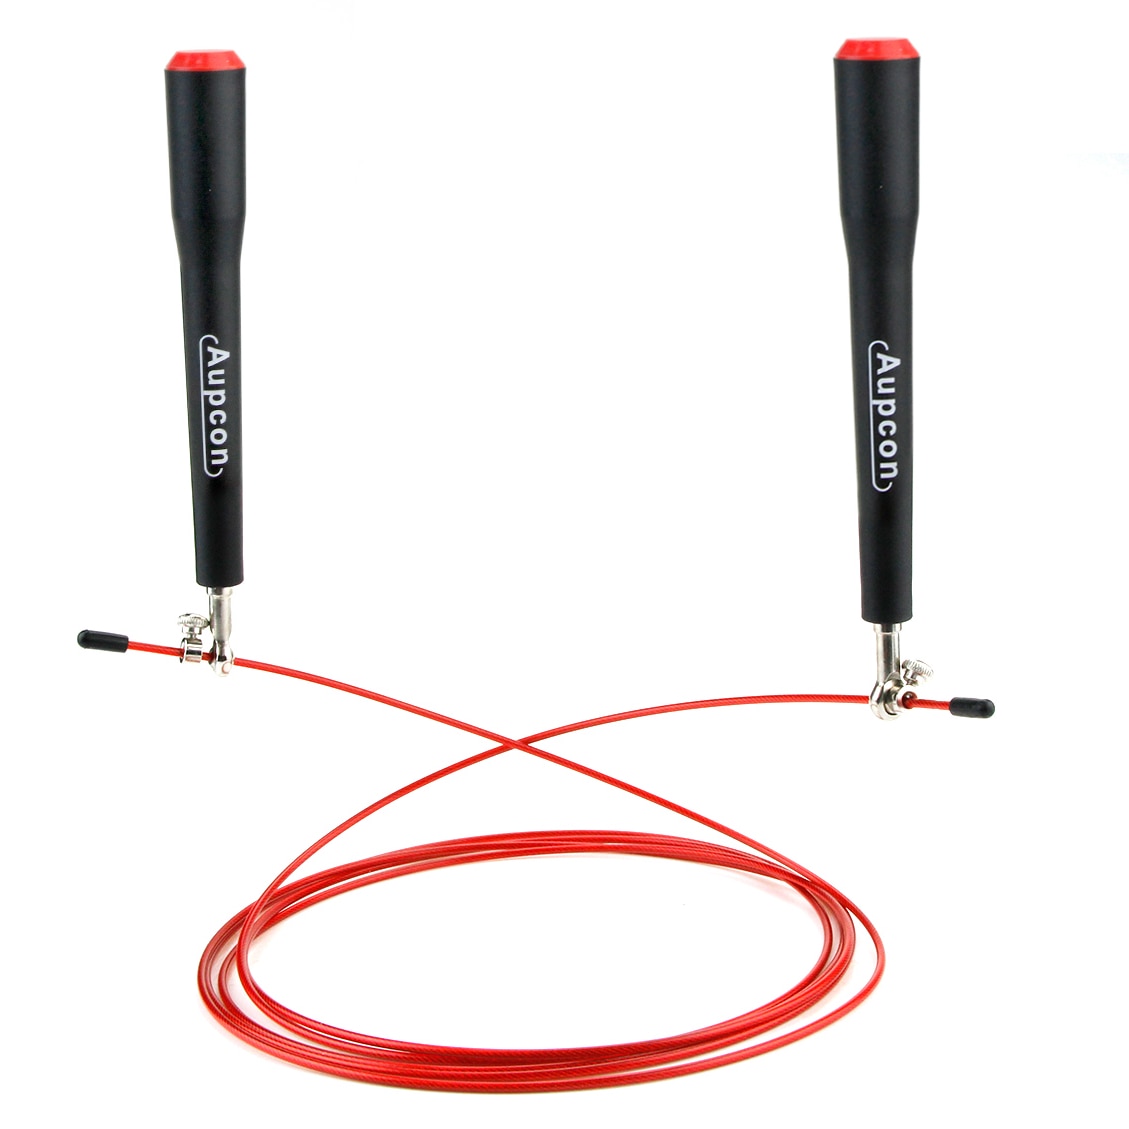 Jump Rope Crossfit Fitness Springtouw Passen Gym Oefening Fitness Boxing Mma